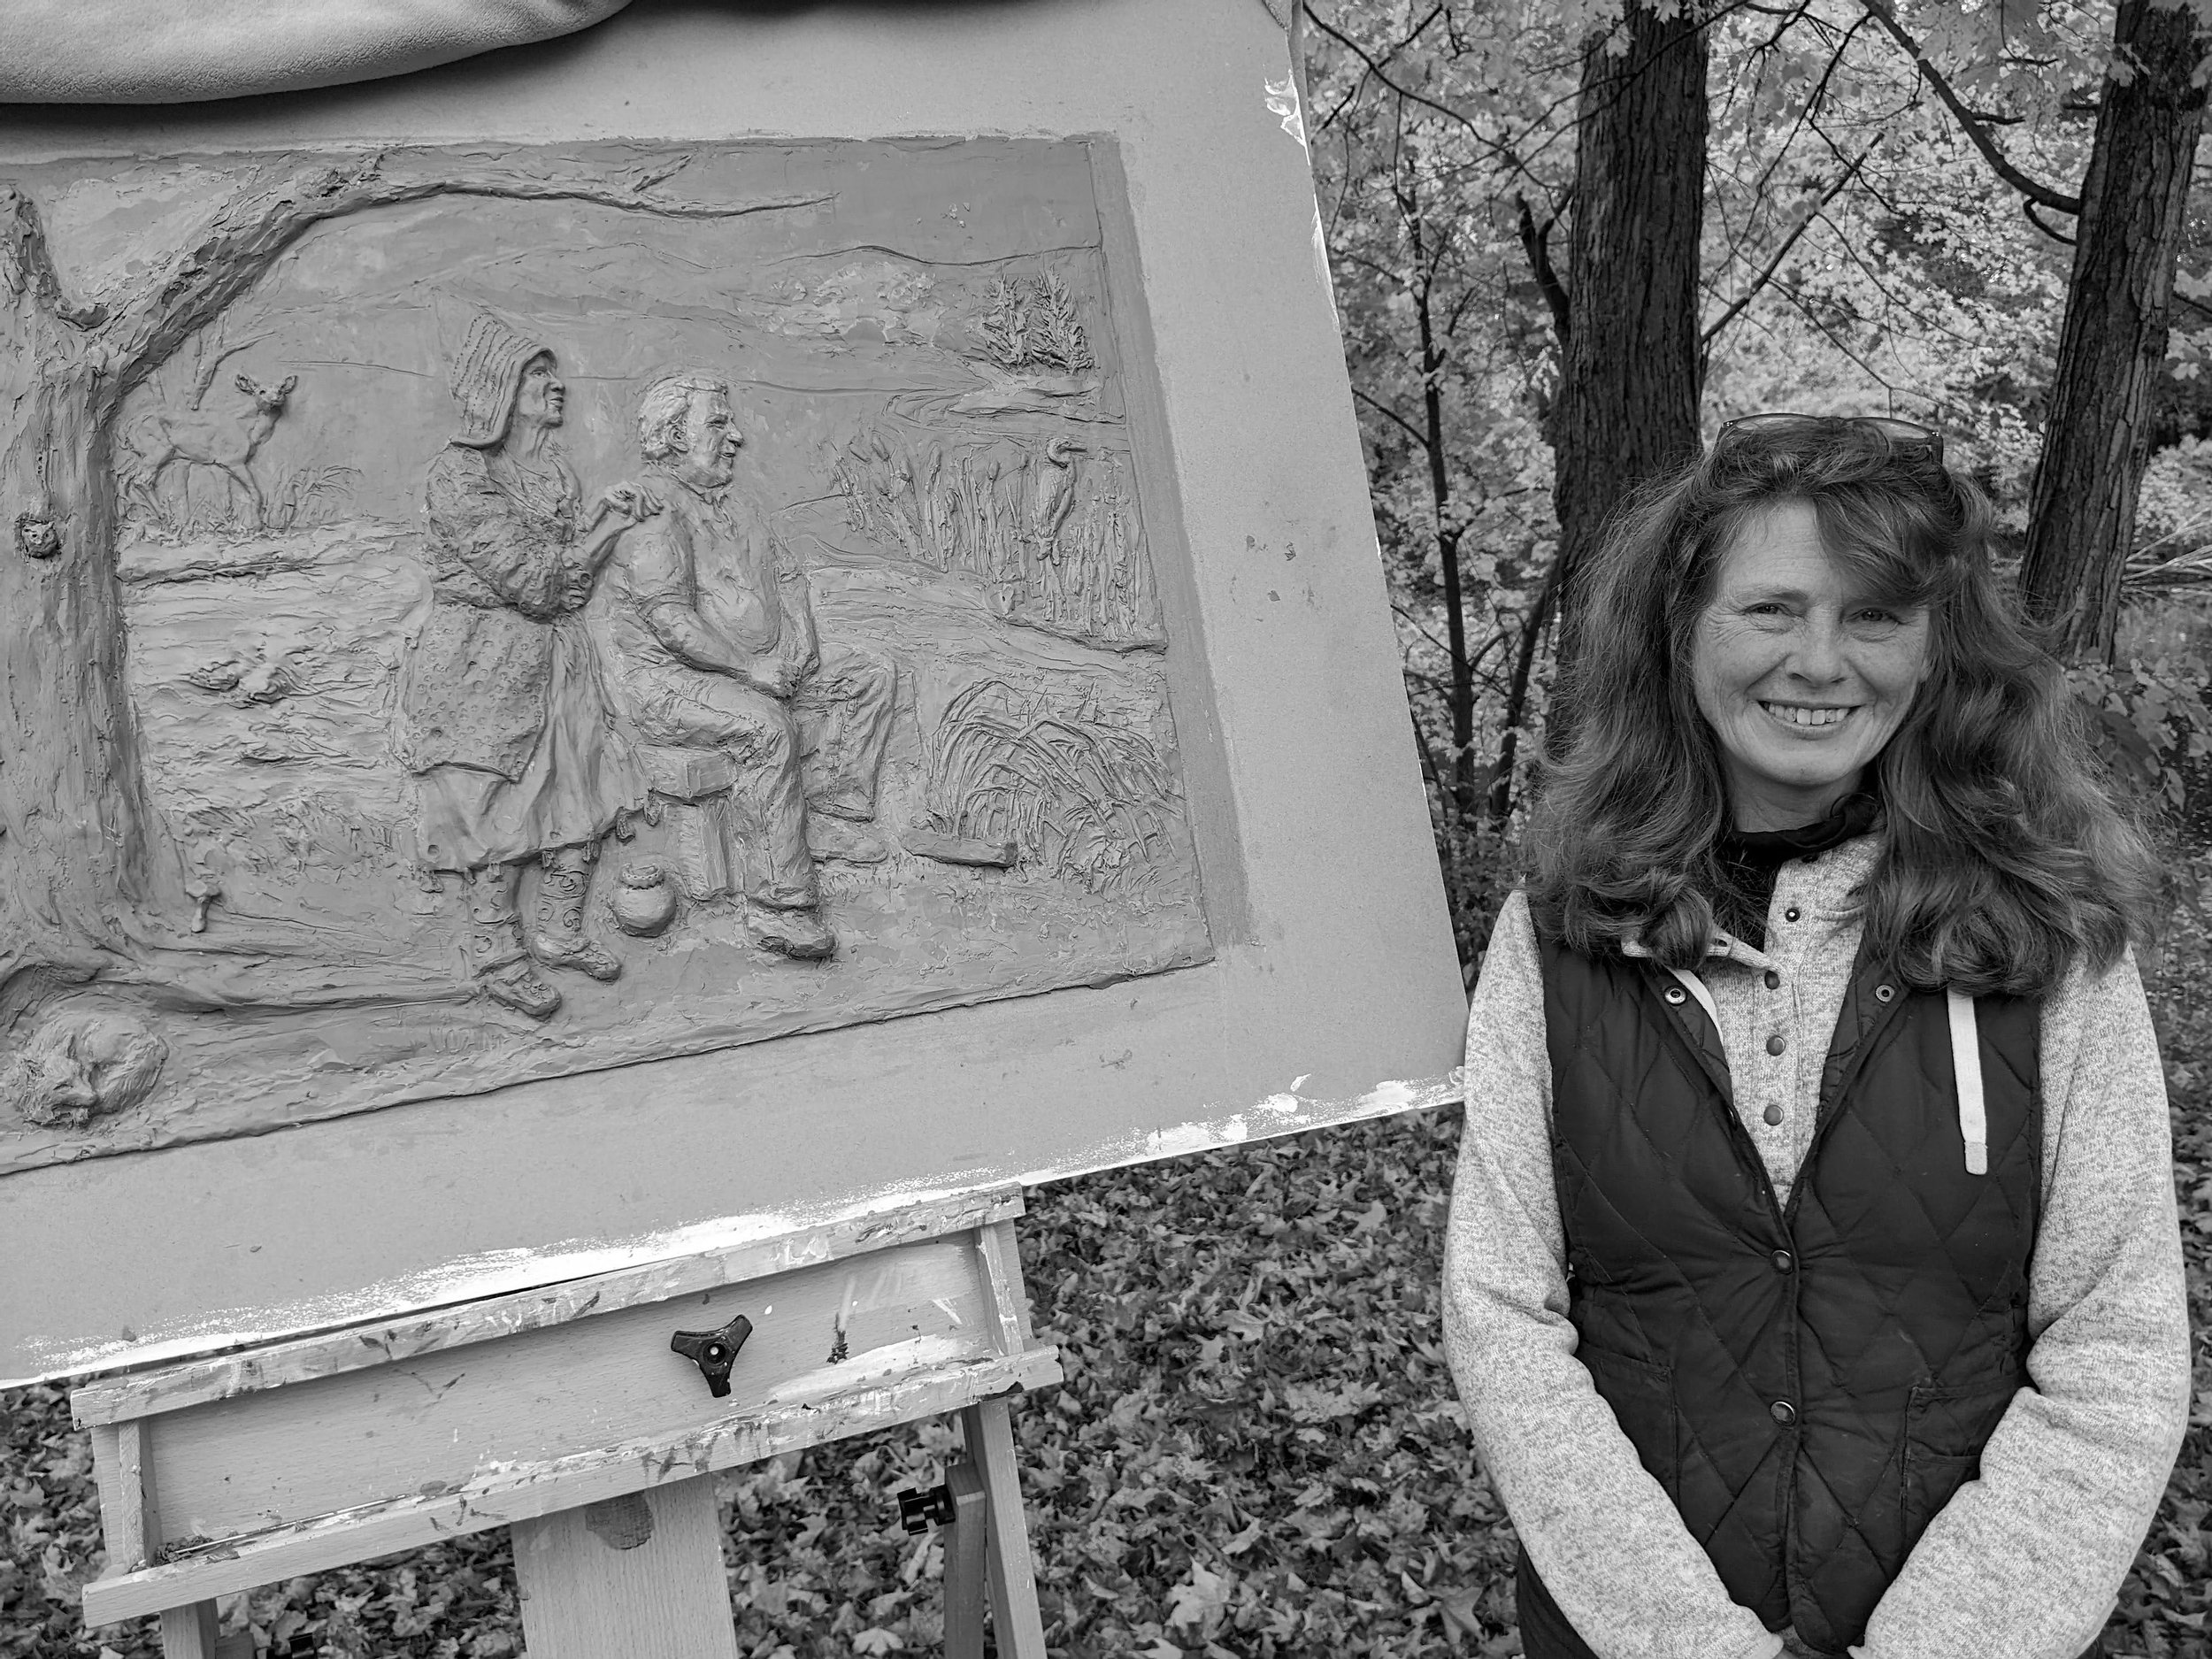 bl and whi sculpture unveiling and me .jpg